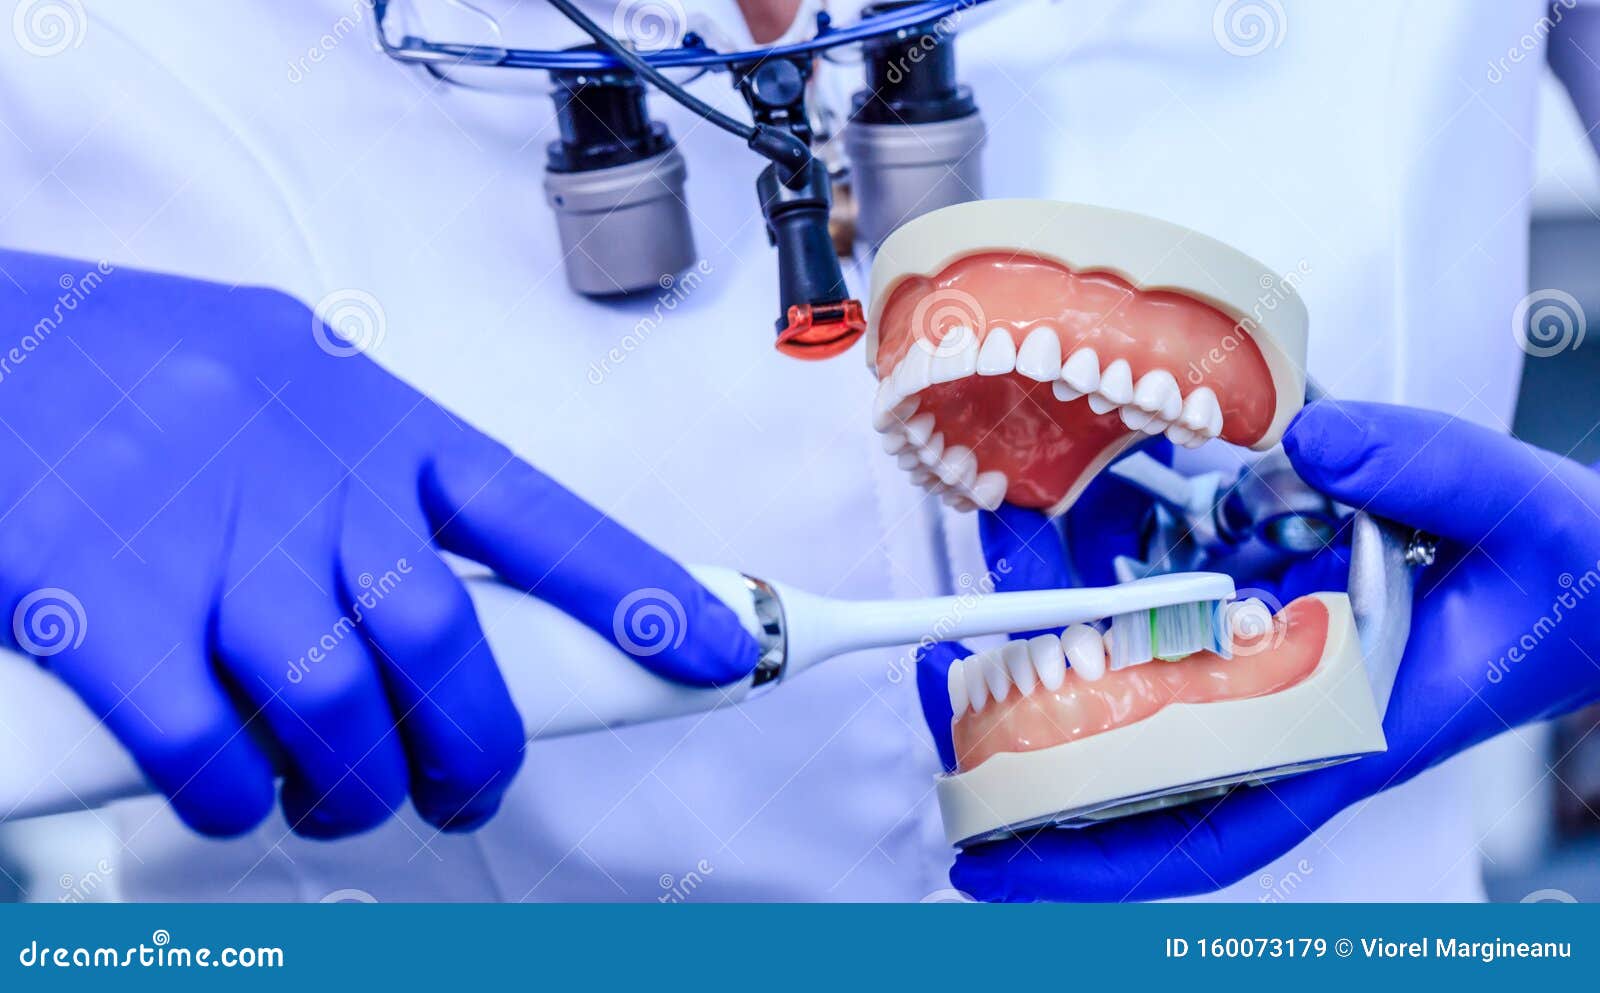 real dentist with blue gloves showing on a jaw model how to clean the teeth with tooth brush properly and right. doctor hands